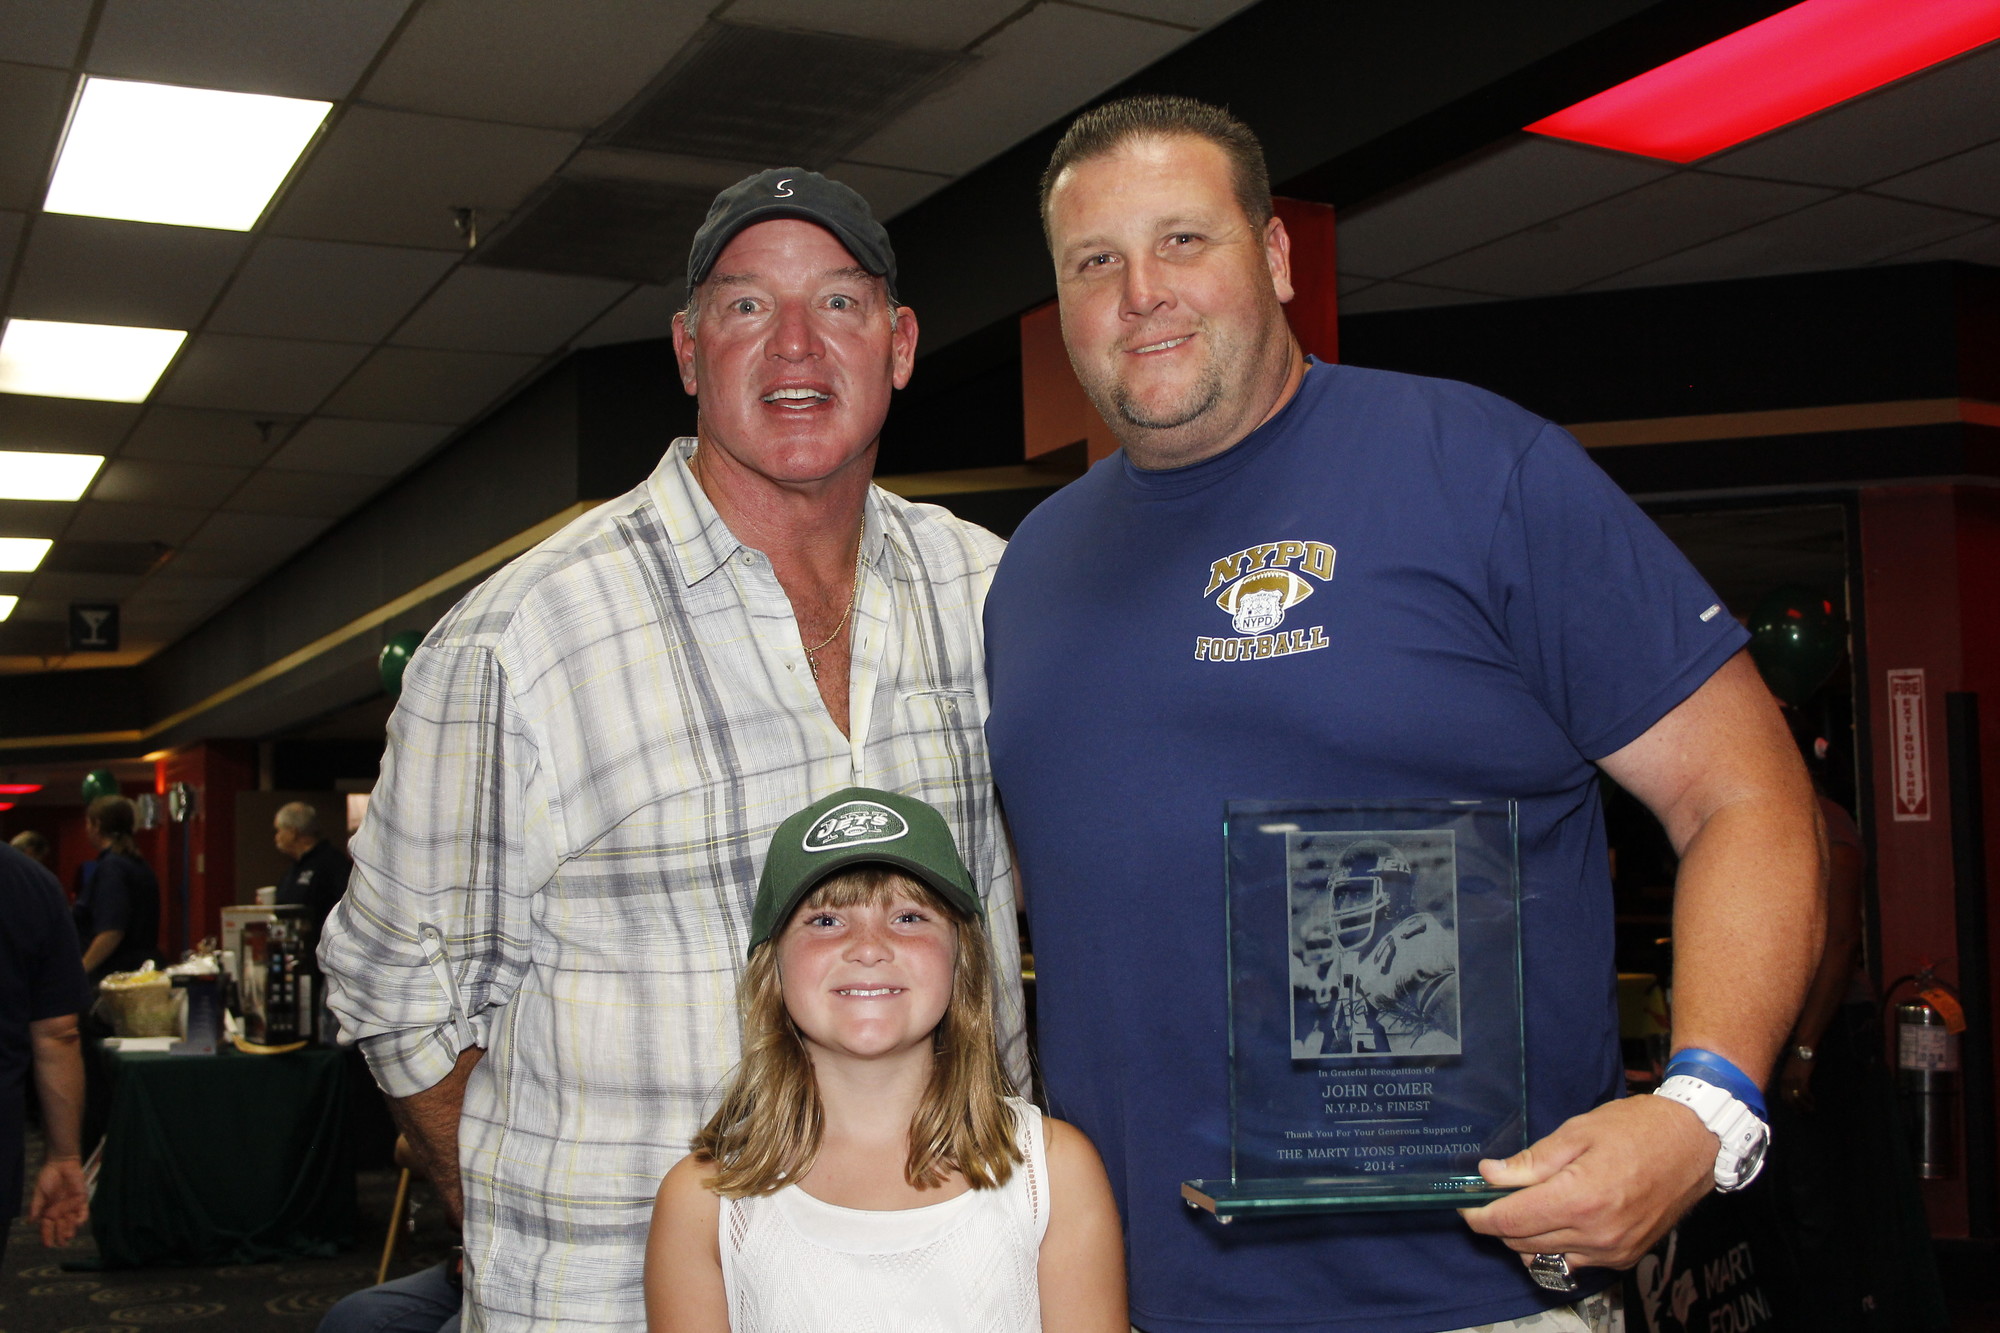 John Comer was honored by Marty Lyons with a plaque that read "In grateful recognition of John Comer, N.Y.P.D.'s Finest. Thank you for your generouos support of the Marty Lyons Foundation, 2014" They are pictured here with Johns daughter Makayla, 8.